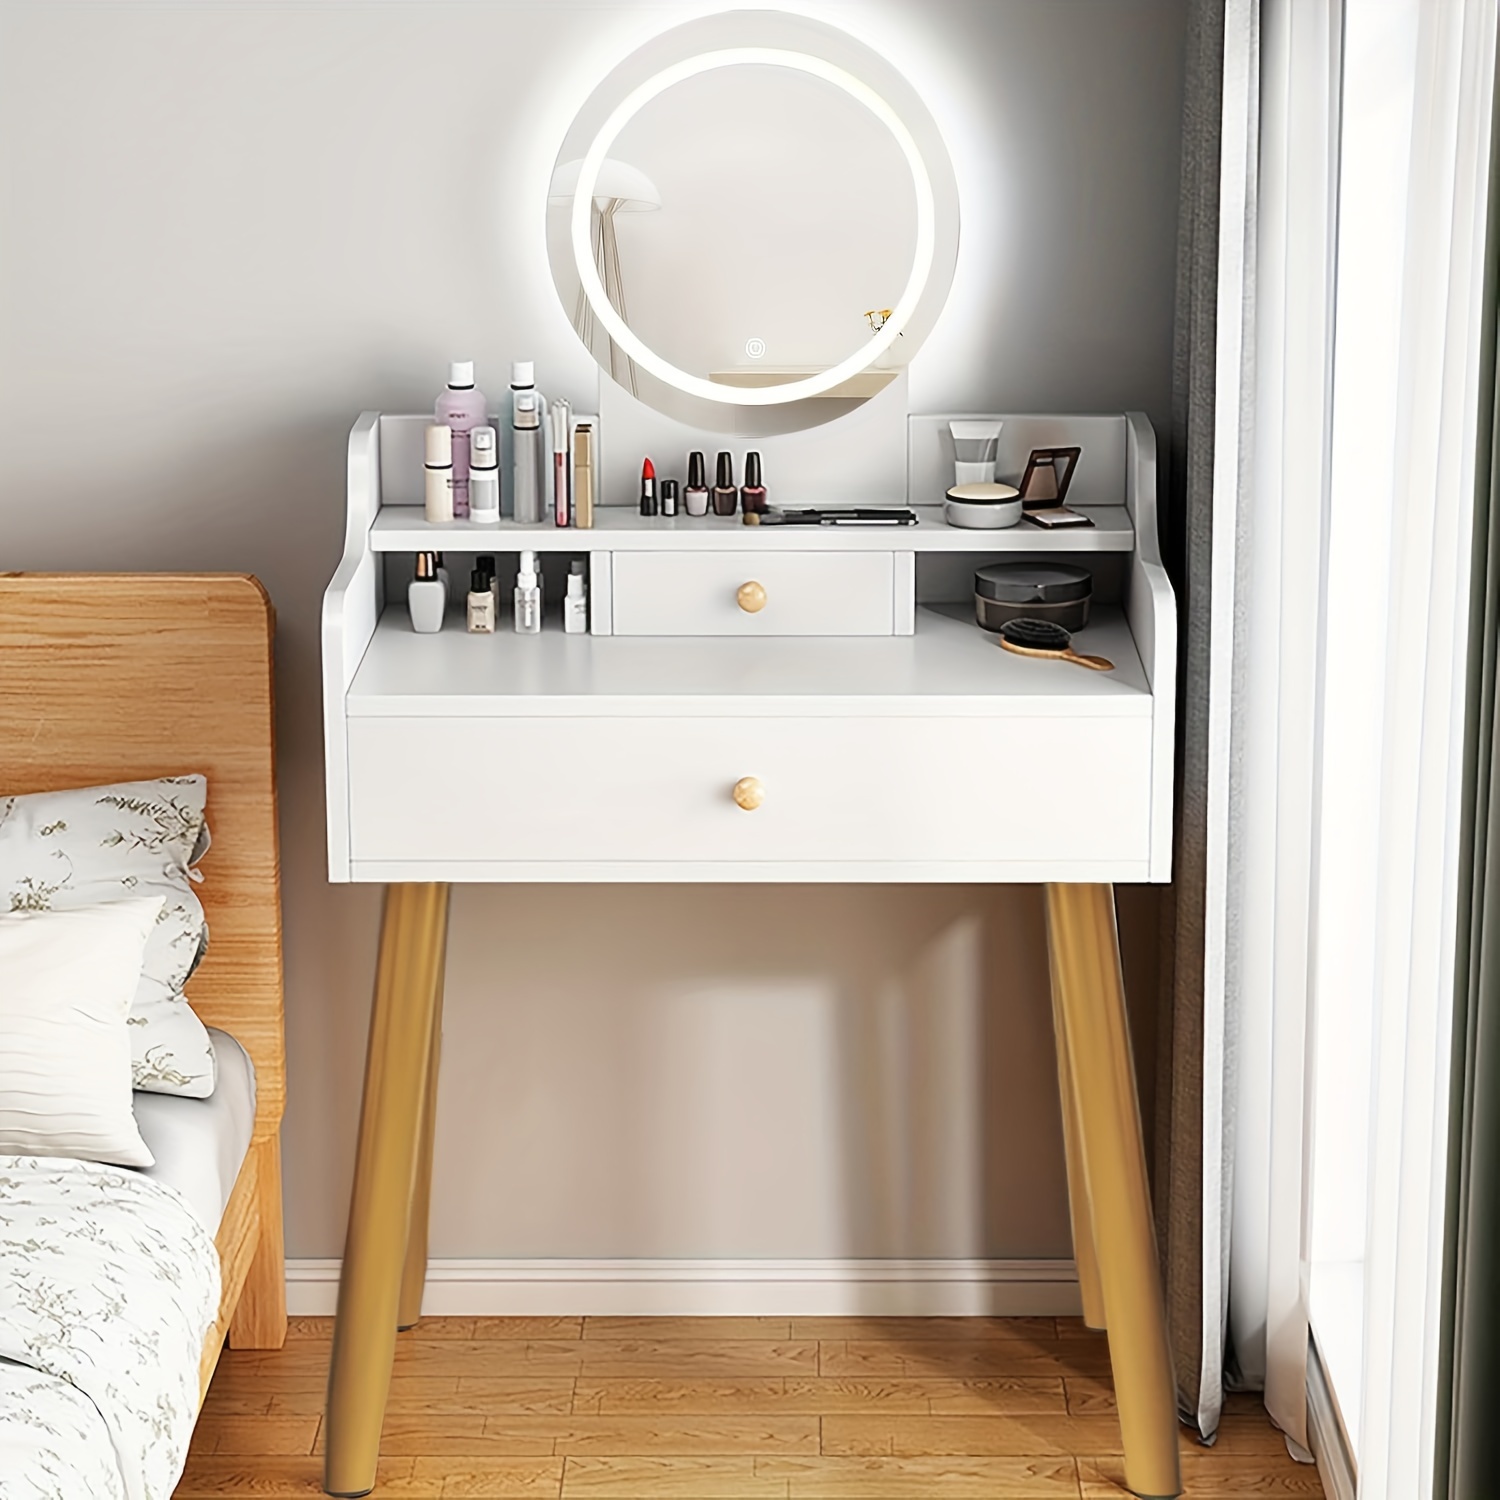 

Vanity Desk, Makeup Vanity Desk With Mirror And Lights, Makeup Vanity Desk With Drawer, Adult Bedside Table Dressing Table, Brightness Adjustable Makeup Table For Bedroom Small Space